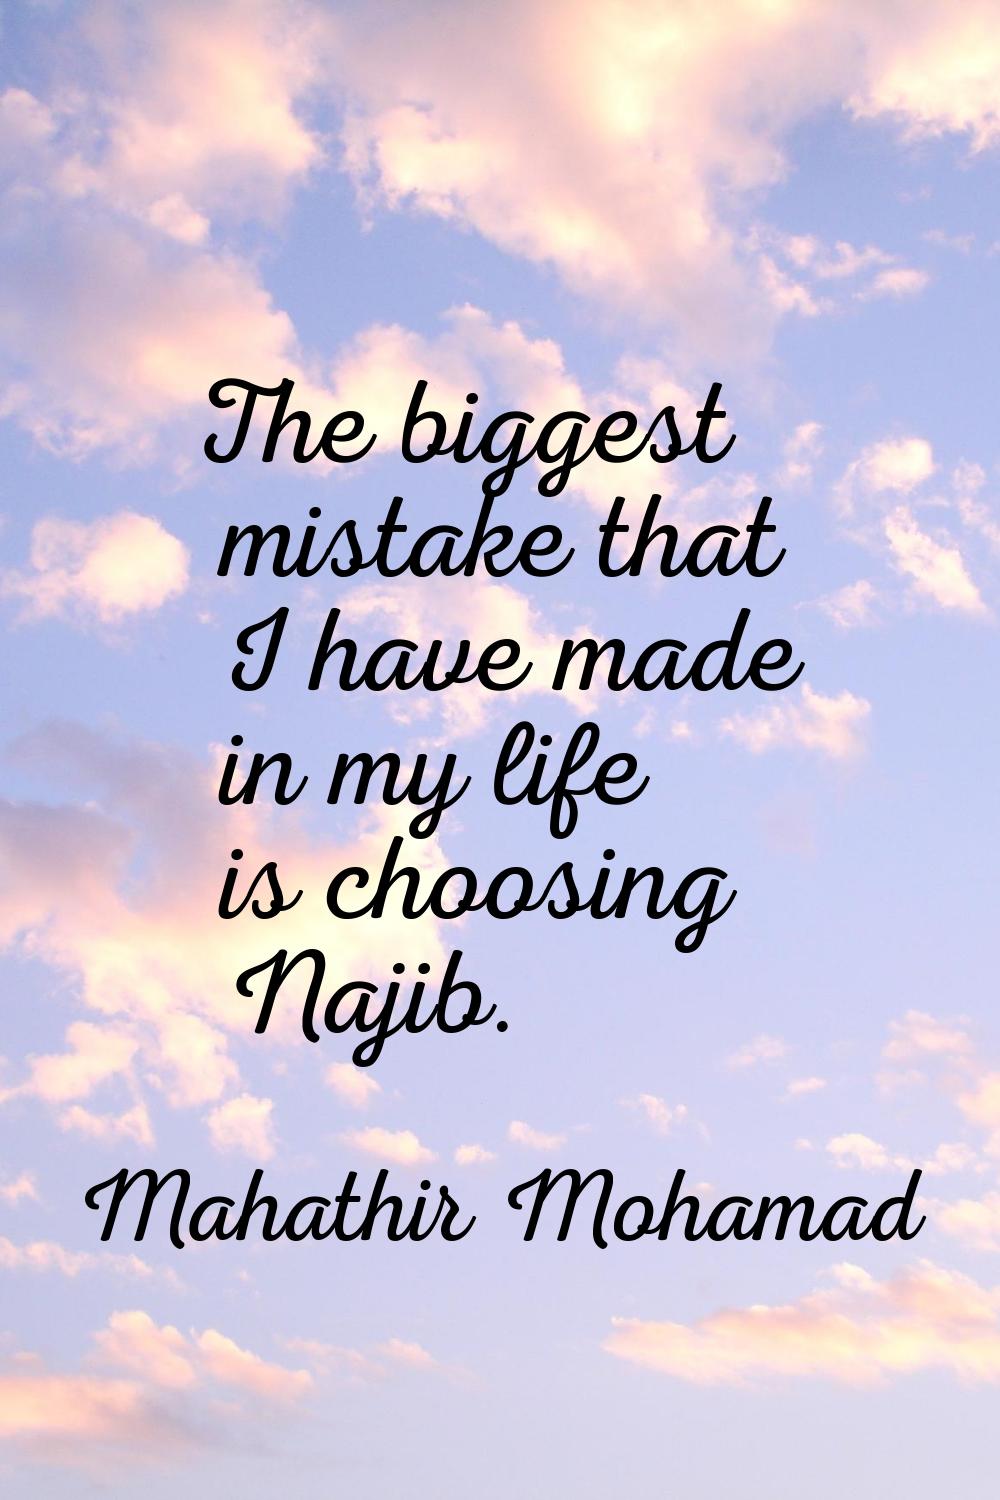 The biggest mistake that I have made in my life is choosing Najib.